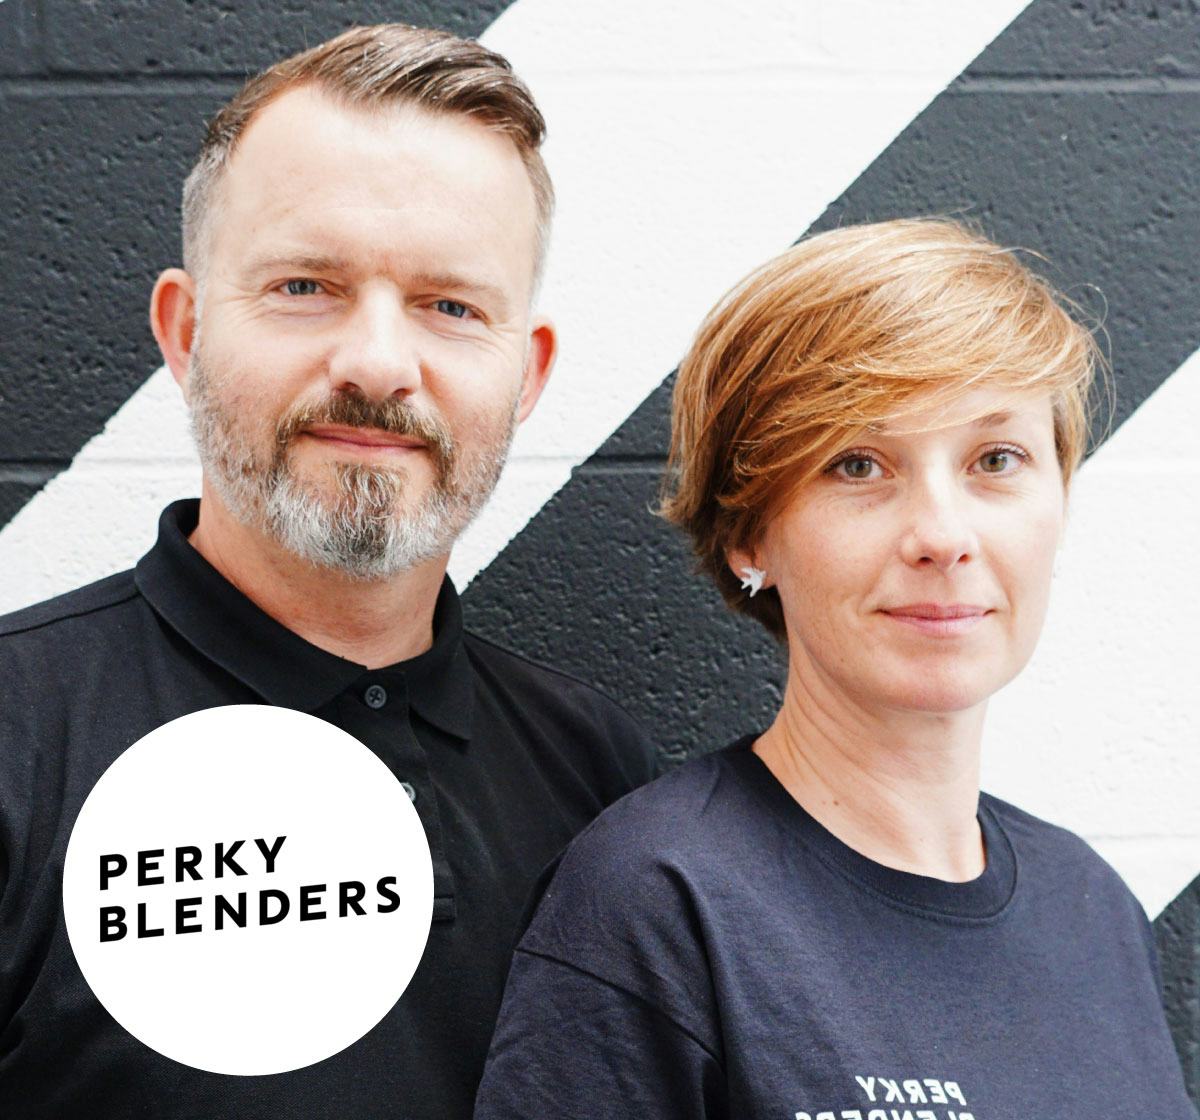 Portrait of employees from Perky Blenders